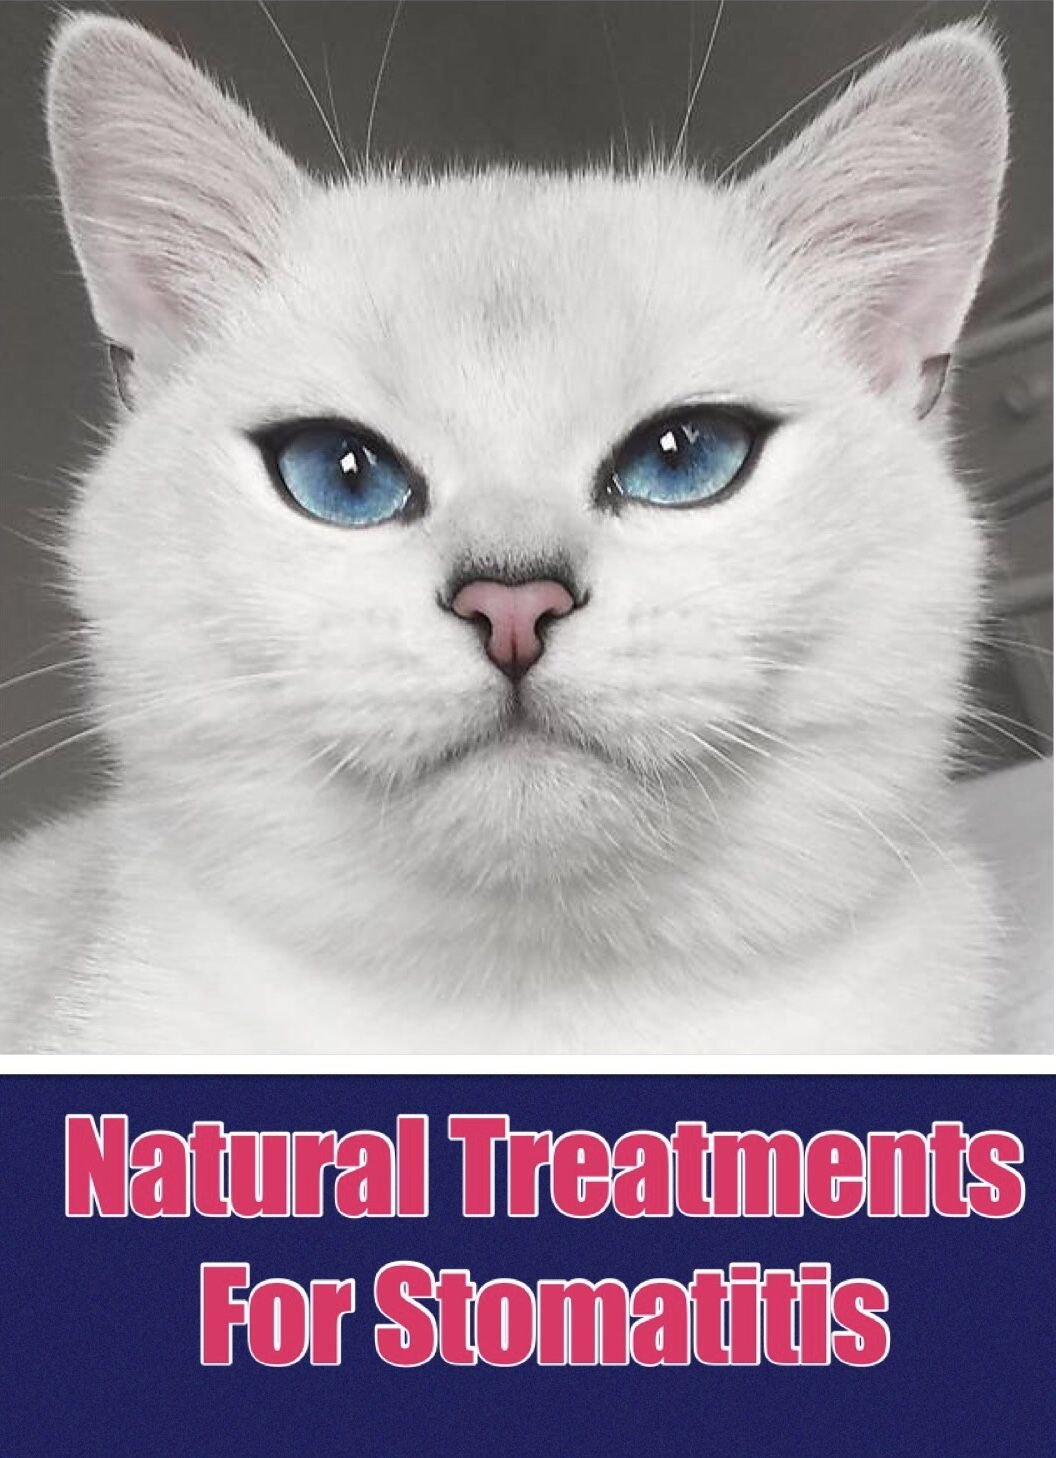 home remedies for cats in pain